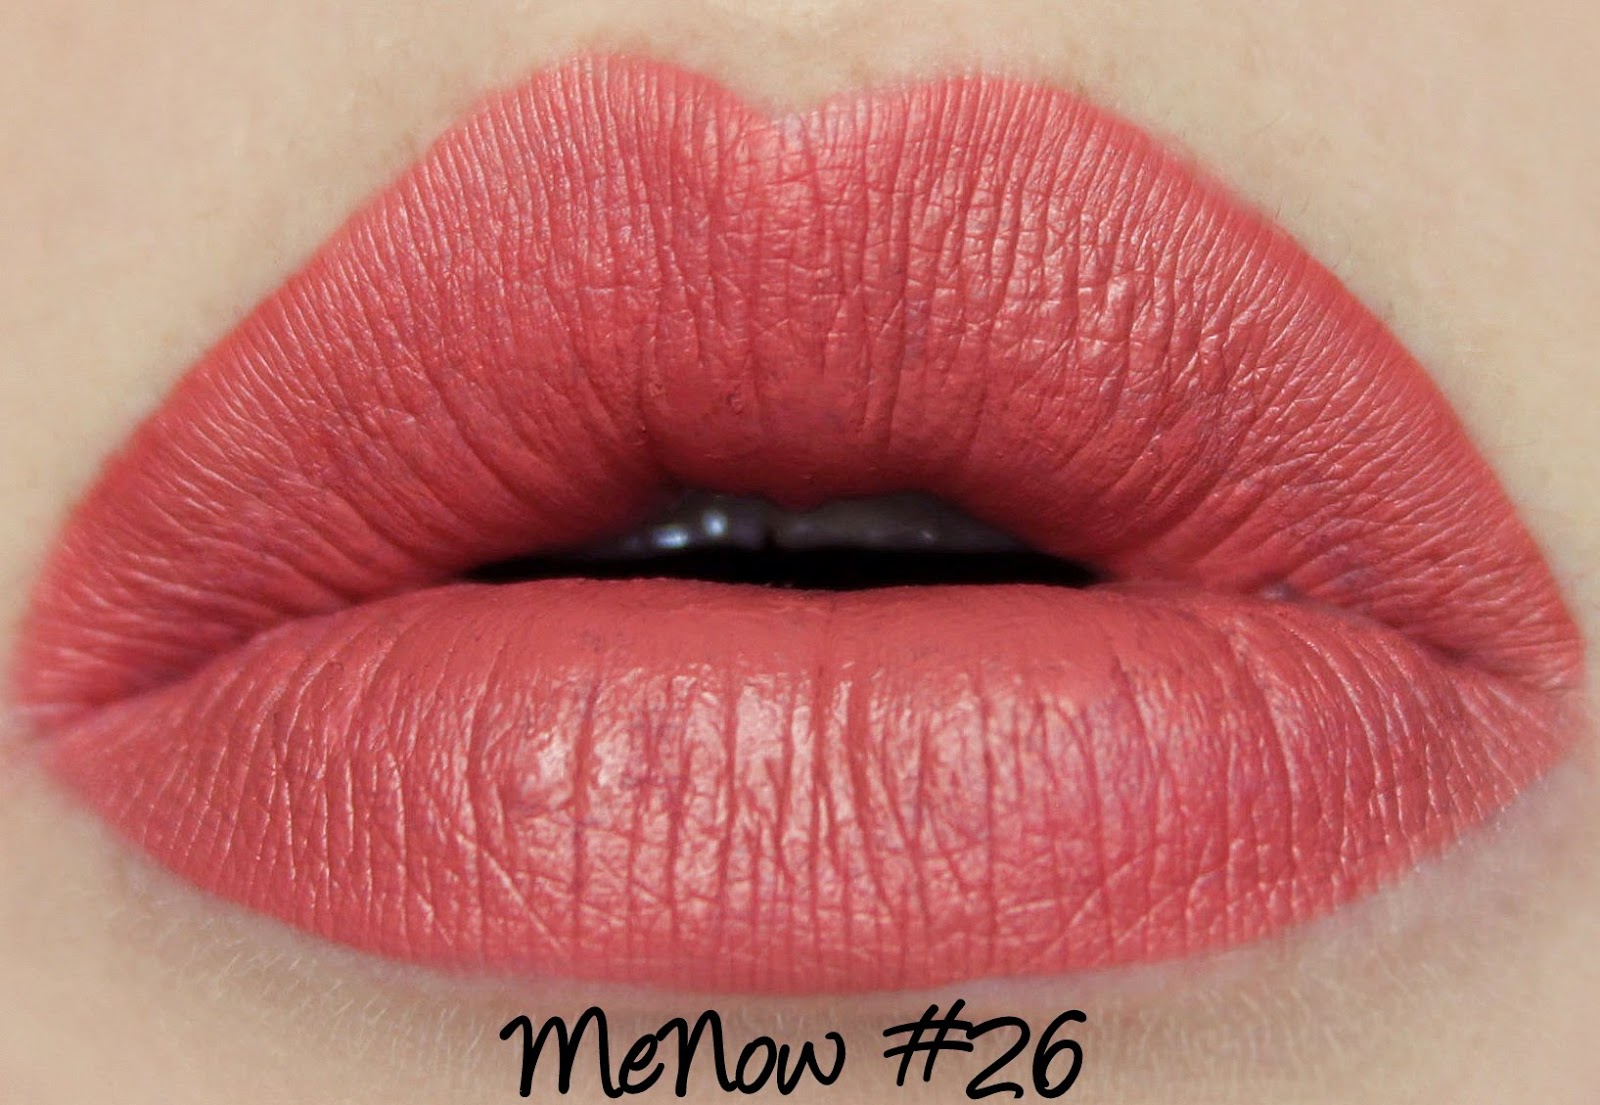 MeNow Generation II Long Lasting Lipgloss #26 Swatches & Review